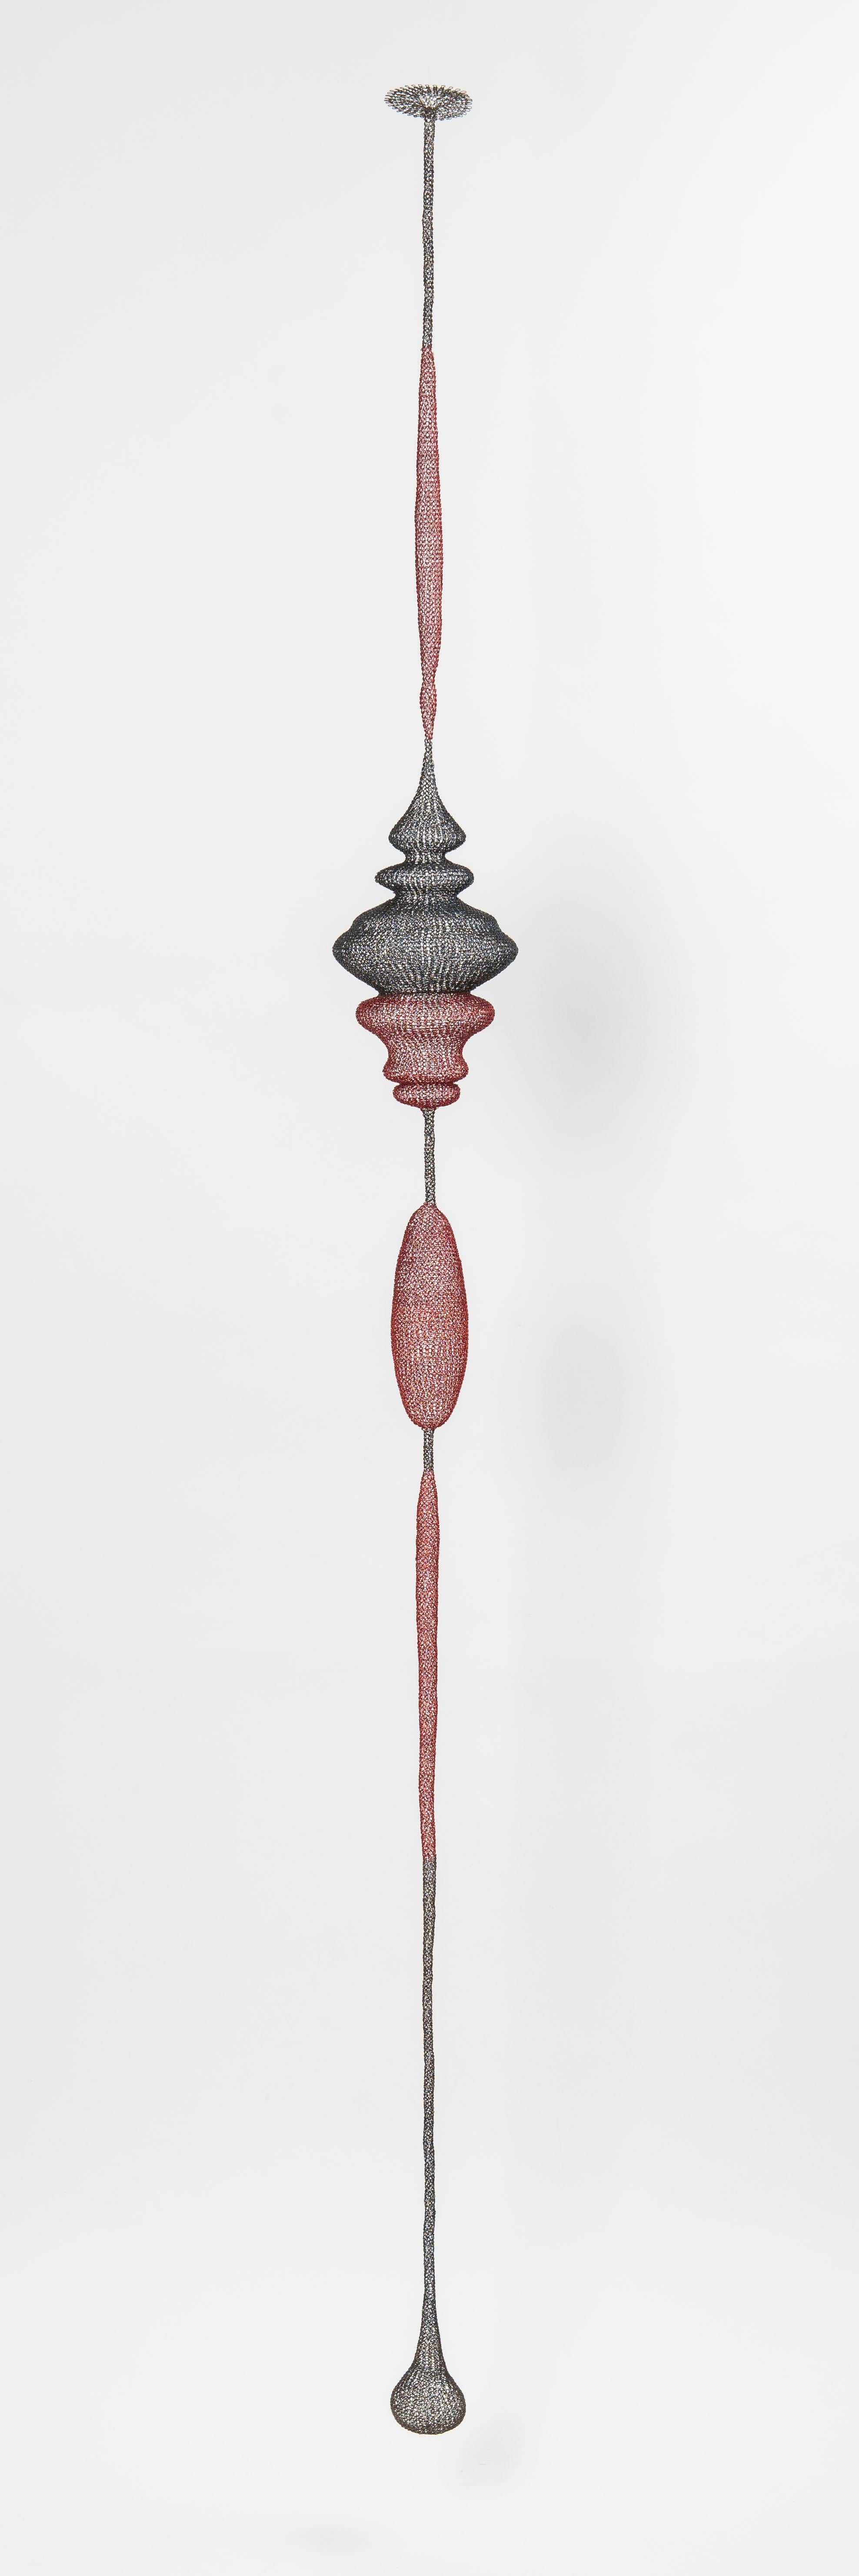 Delphine Grandvaux Abstract Sculpture - "L'éclaireuse", Black and Red Metal Hand-Woven Pendant Airy Tall Sculpture